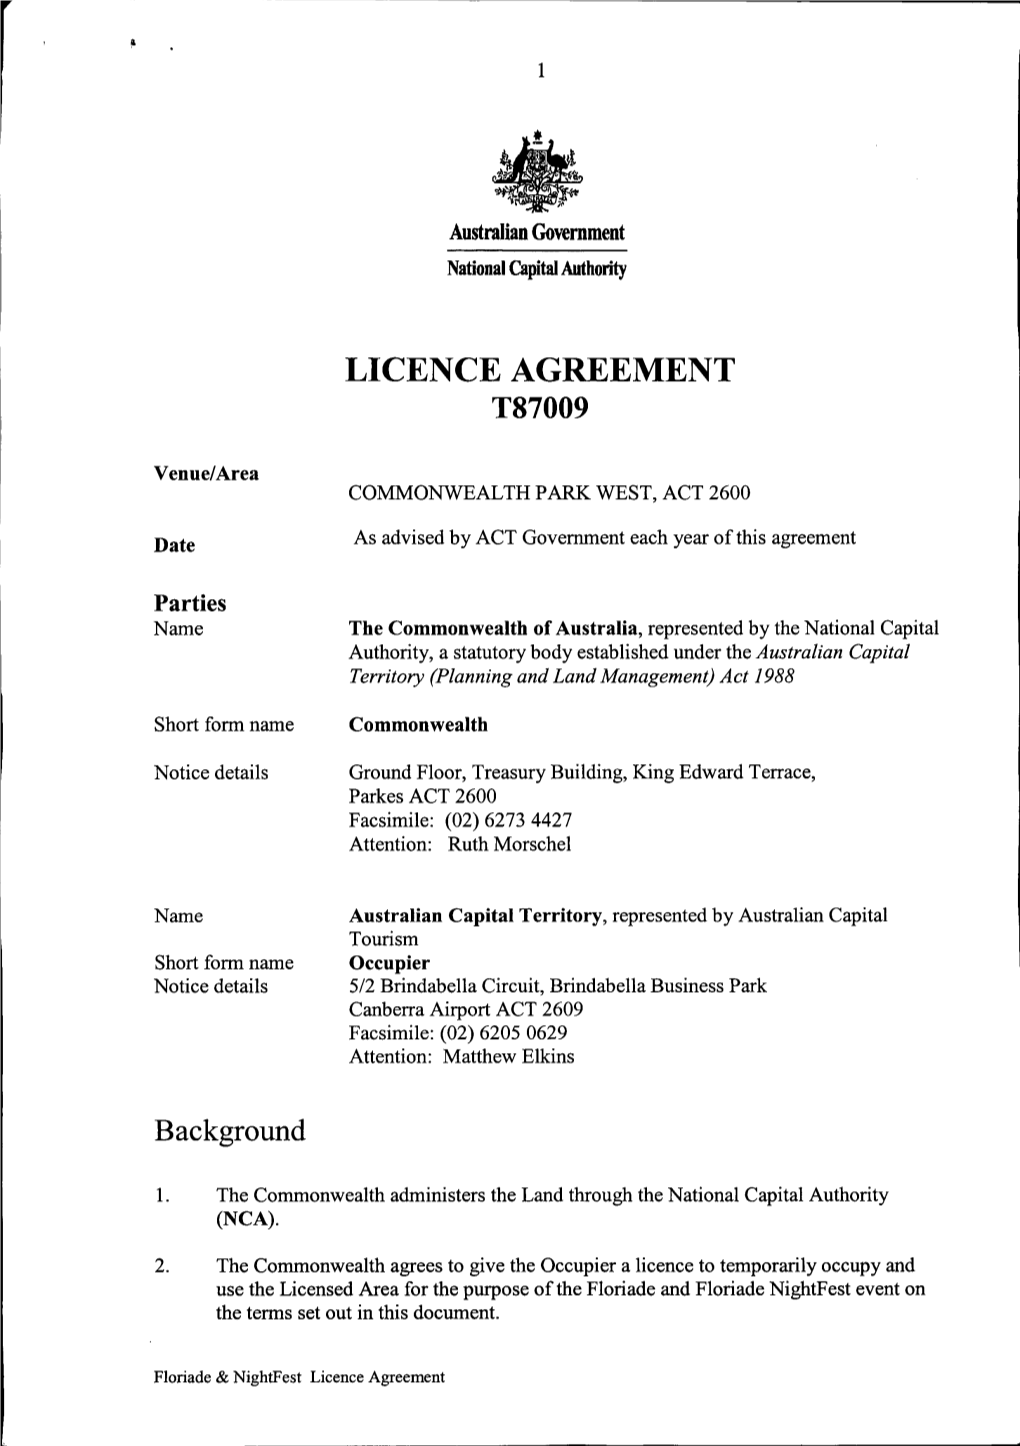 Licence Agreement to Occupying Commonwealth Park for The